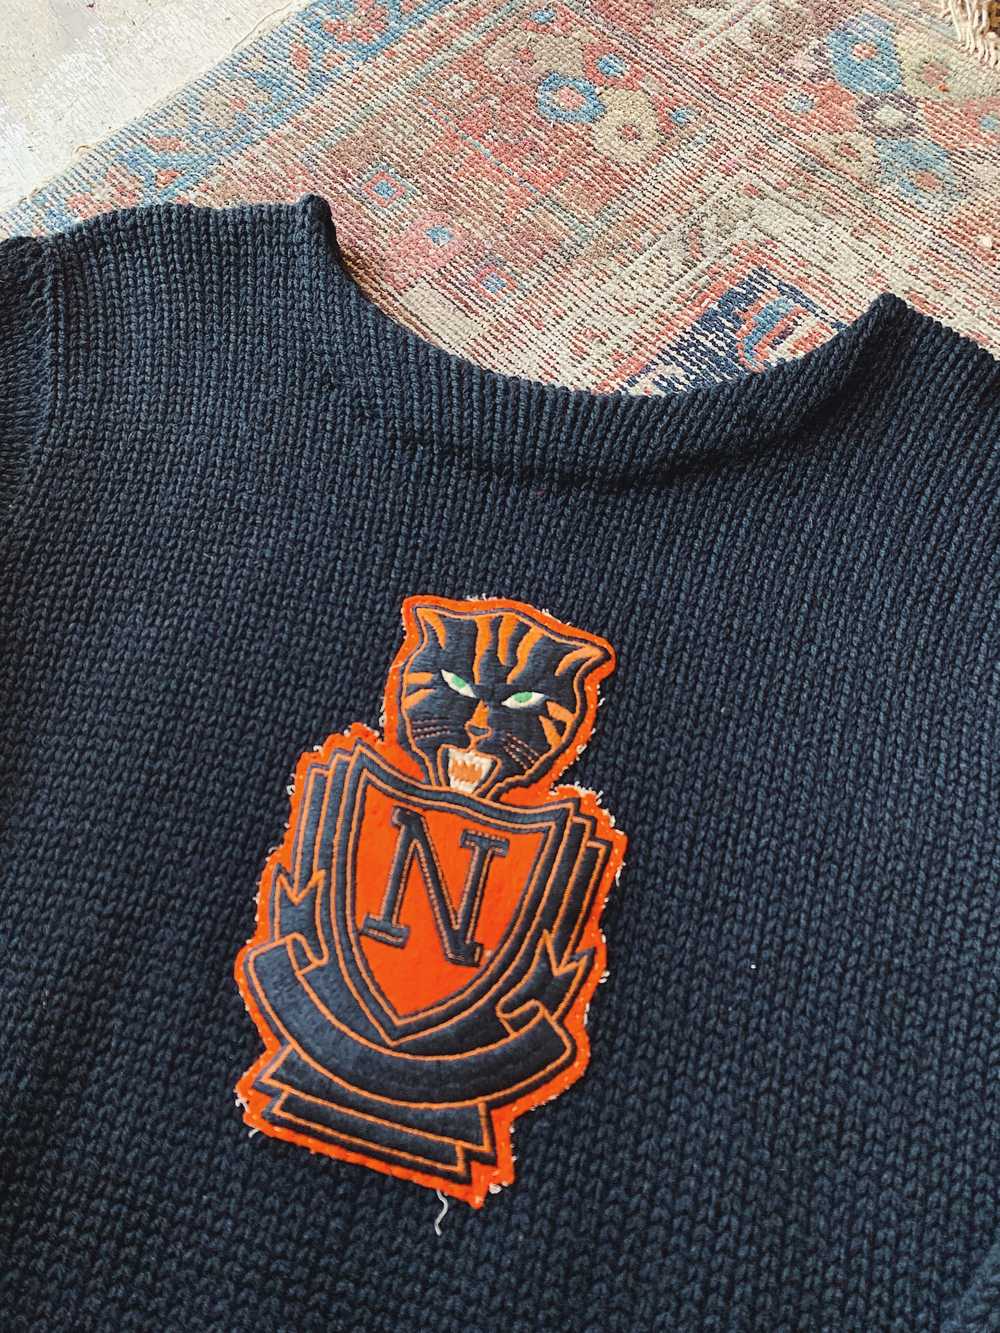 Vintage Indian Brand Varsity Sweater - Size Small - image 2